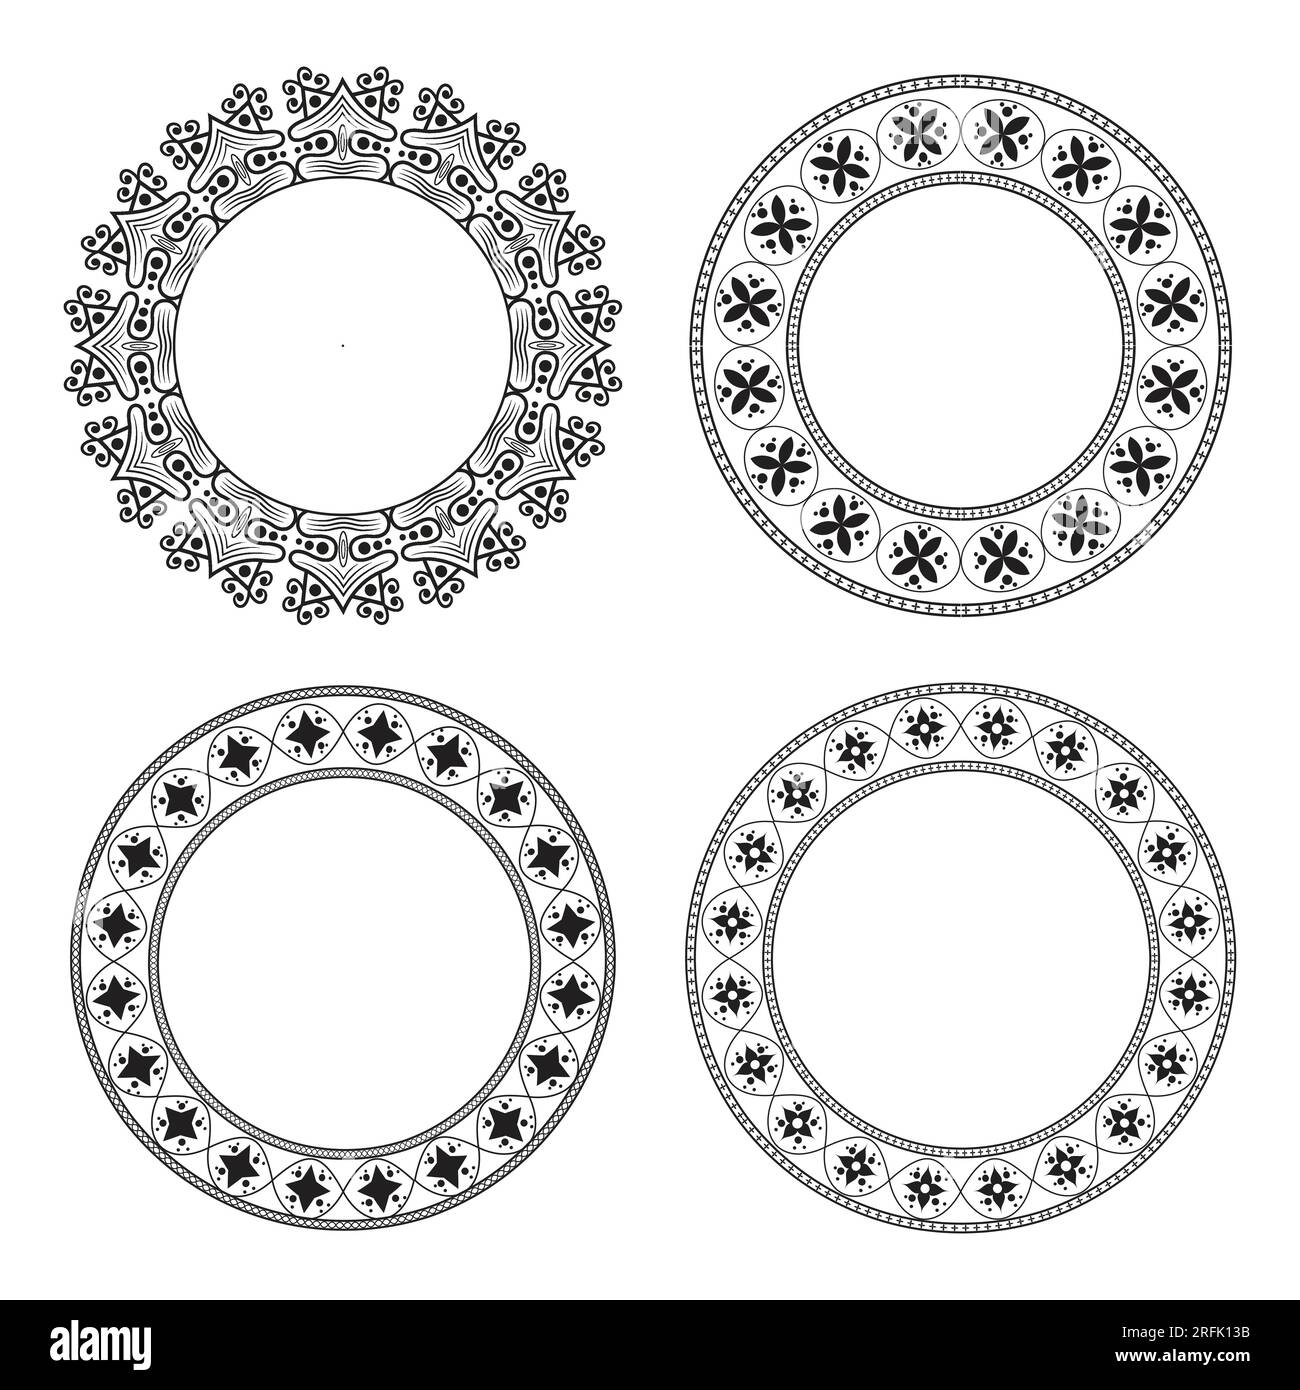 Set of circle outline round flower pattern frames for colouring book page, doodle ornament in black and white, hand draw vector illustration. Stock Vector